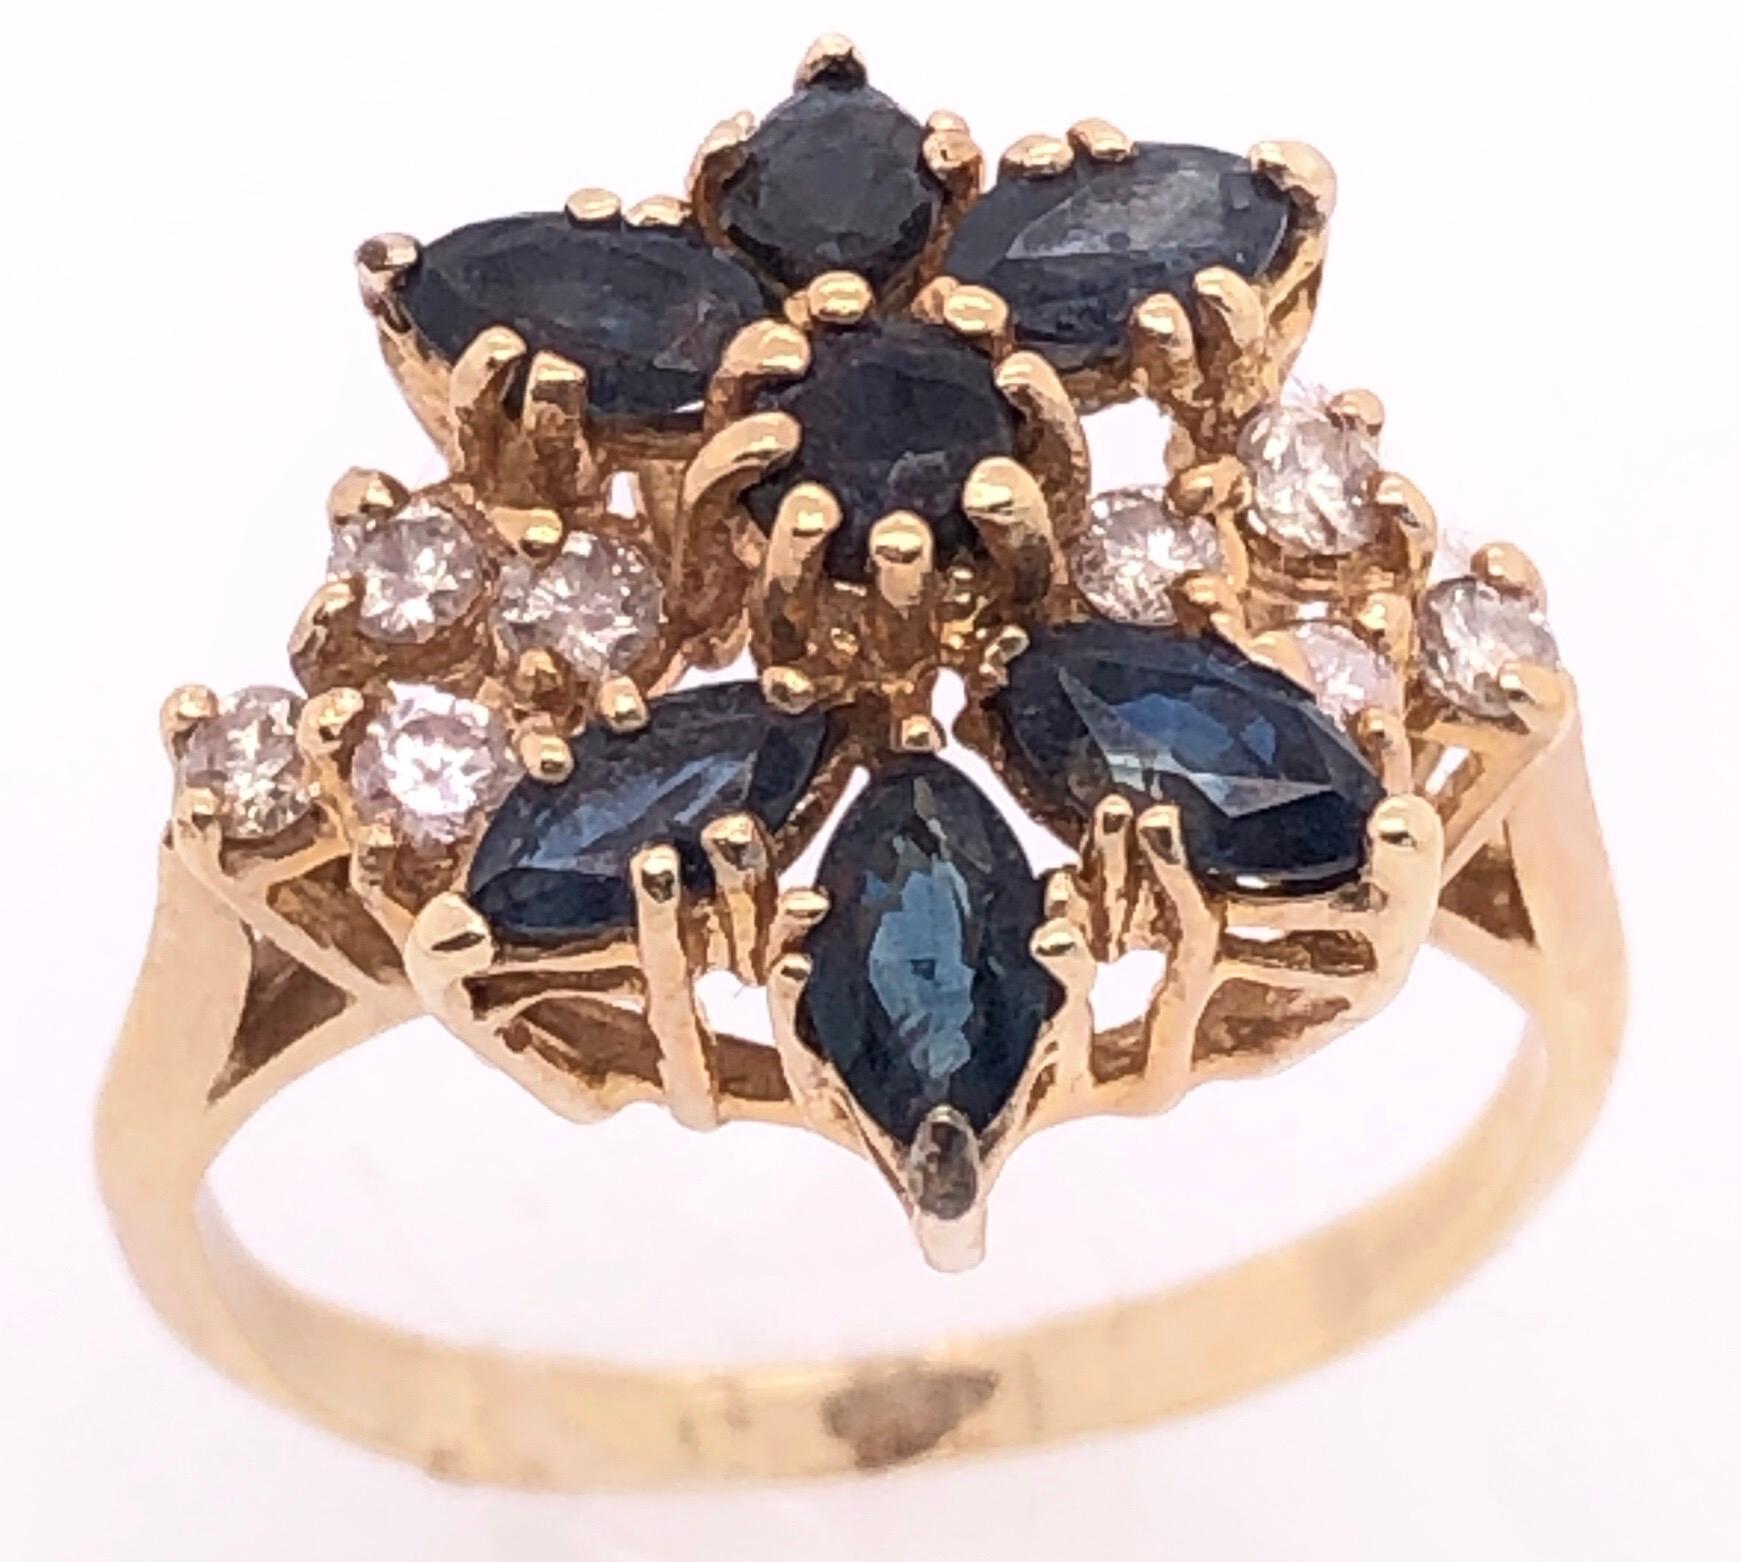 14 Karat Yellow Gold Cluster Ring with Onyx and Diamonds Size 6.
8 round diamonds
3.60 grams total weight.